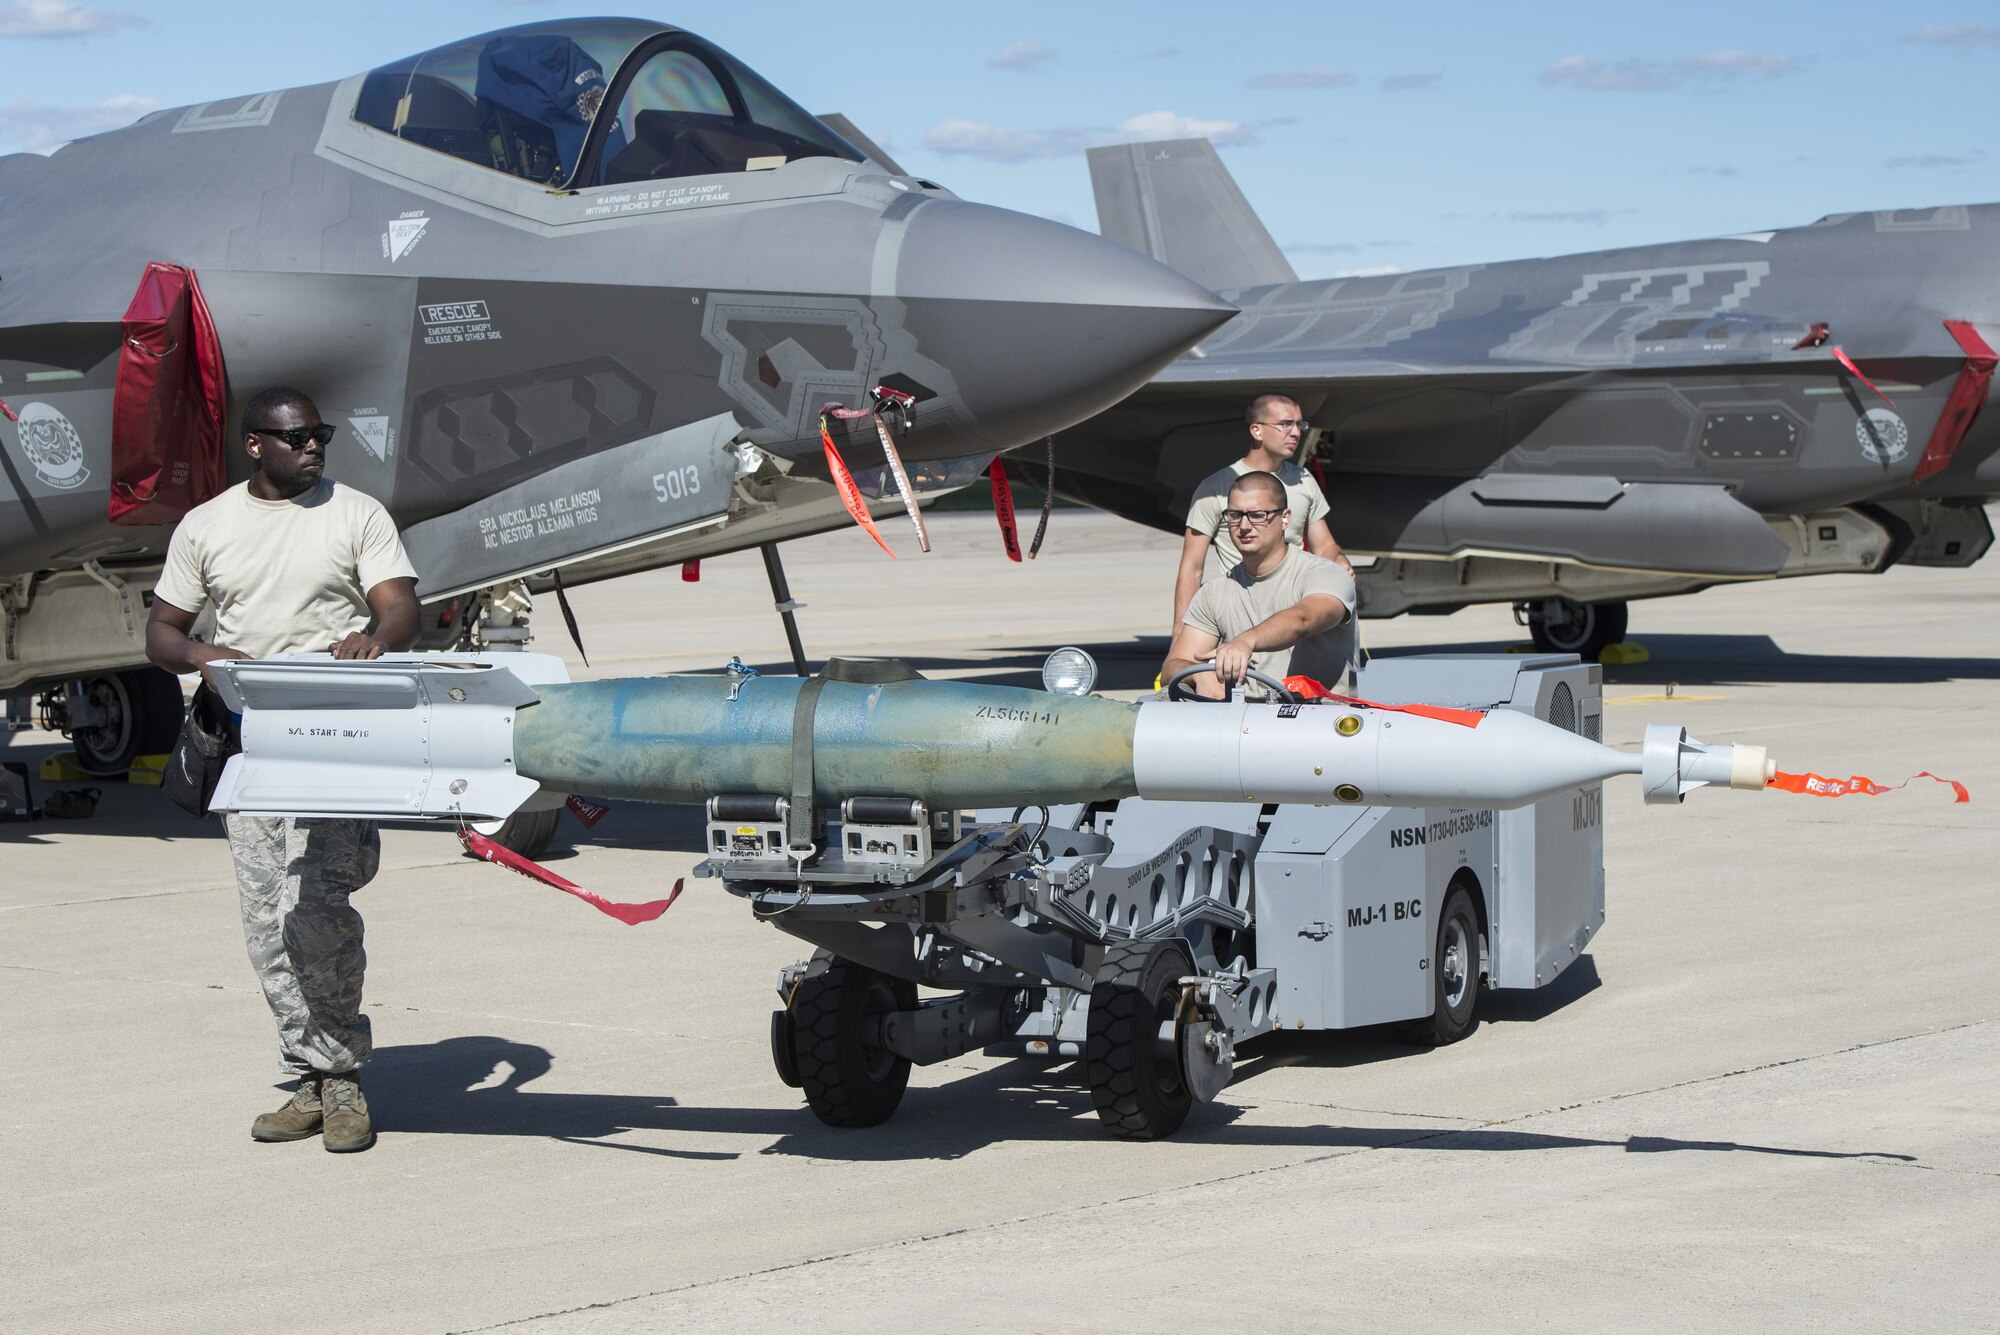 58th Aircraft Maintenance Unit weapons load crew members unload a GBU-12 from an F-35A during exercise Northern Lightning Aug. 31, 2016, at Volk Field, Wis. During the exercise, 33rd FW pilots were able to execute offensive counter air, suppression of enemy air defenses, destruction of enemy air defenses, and the employ GPS-guided munitions  for close air support. (U.S. Air Force photo by Senior Airman Stormy Archer)